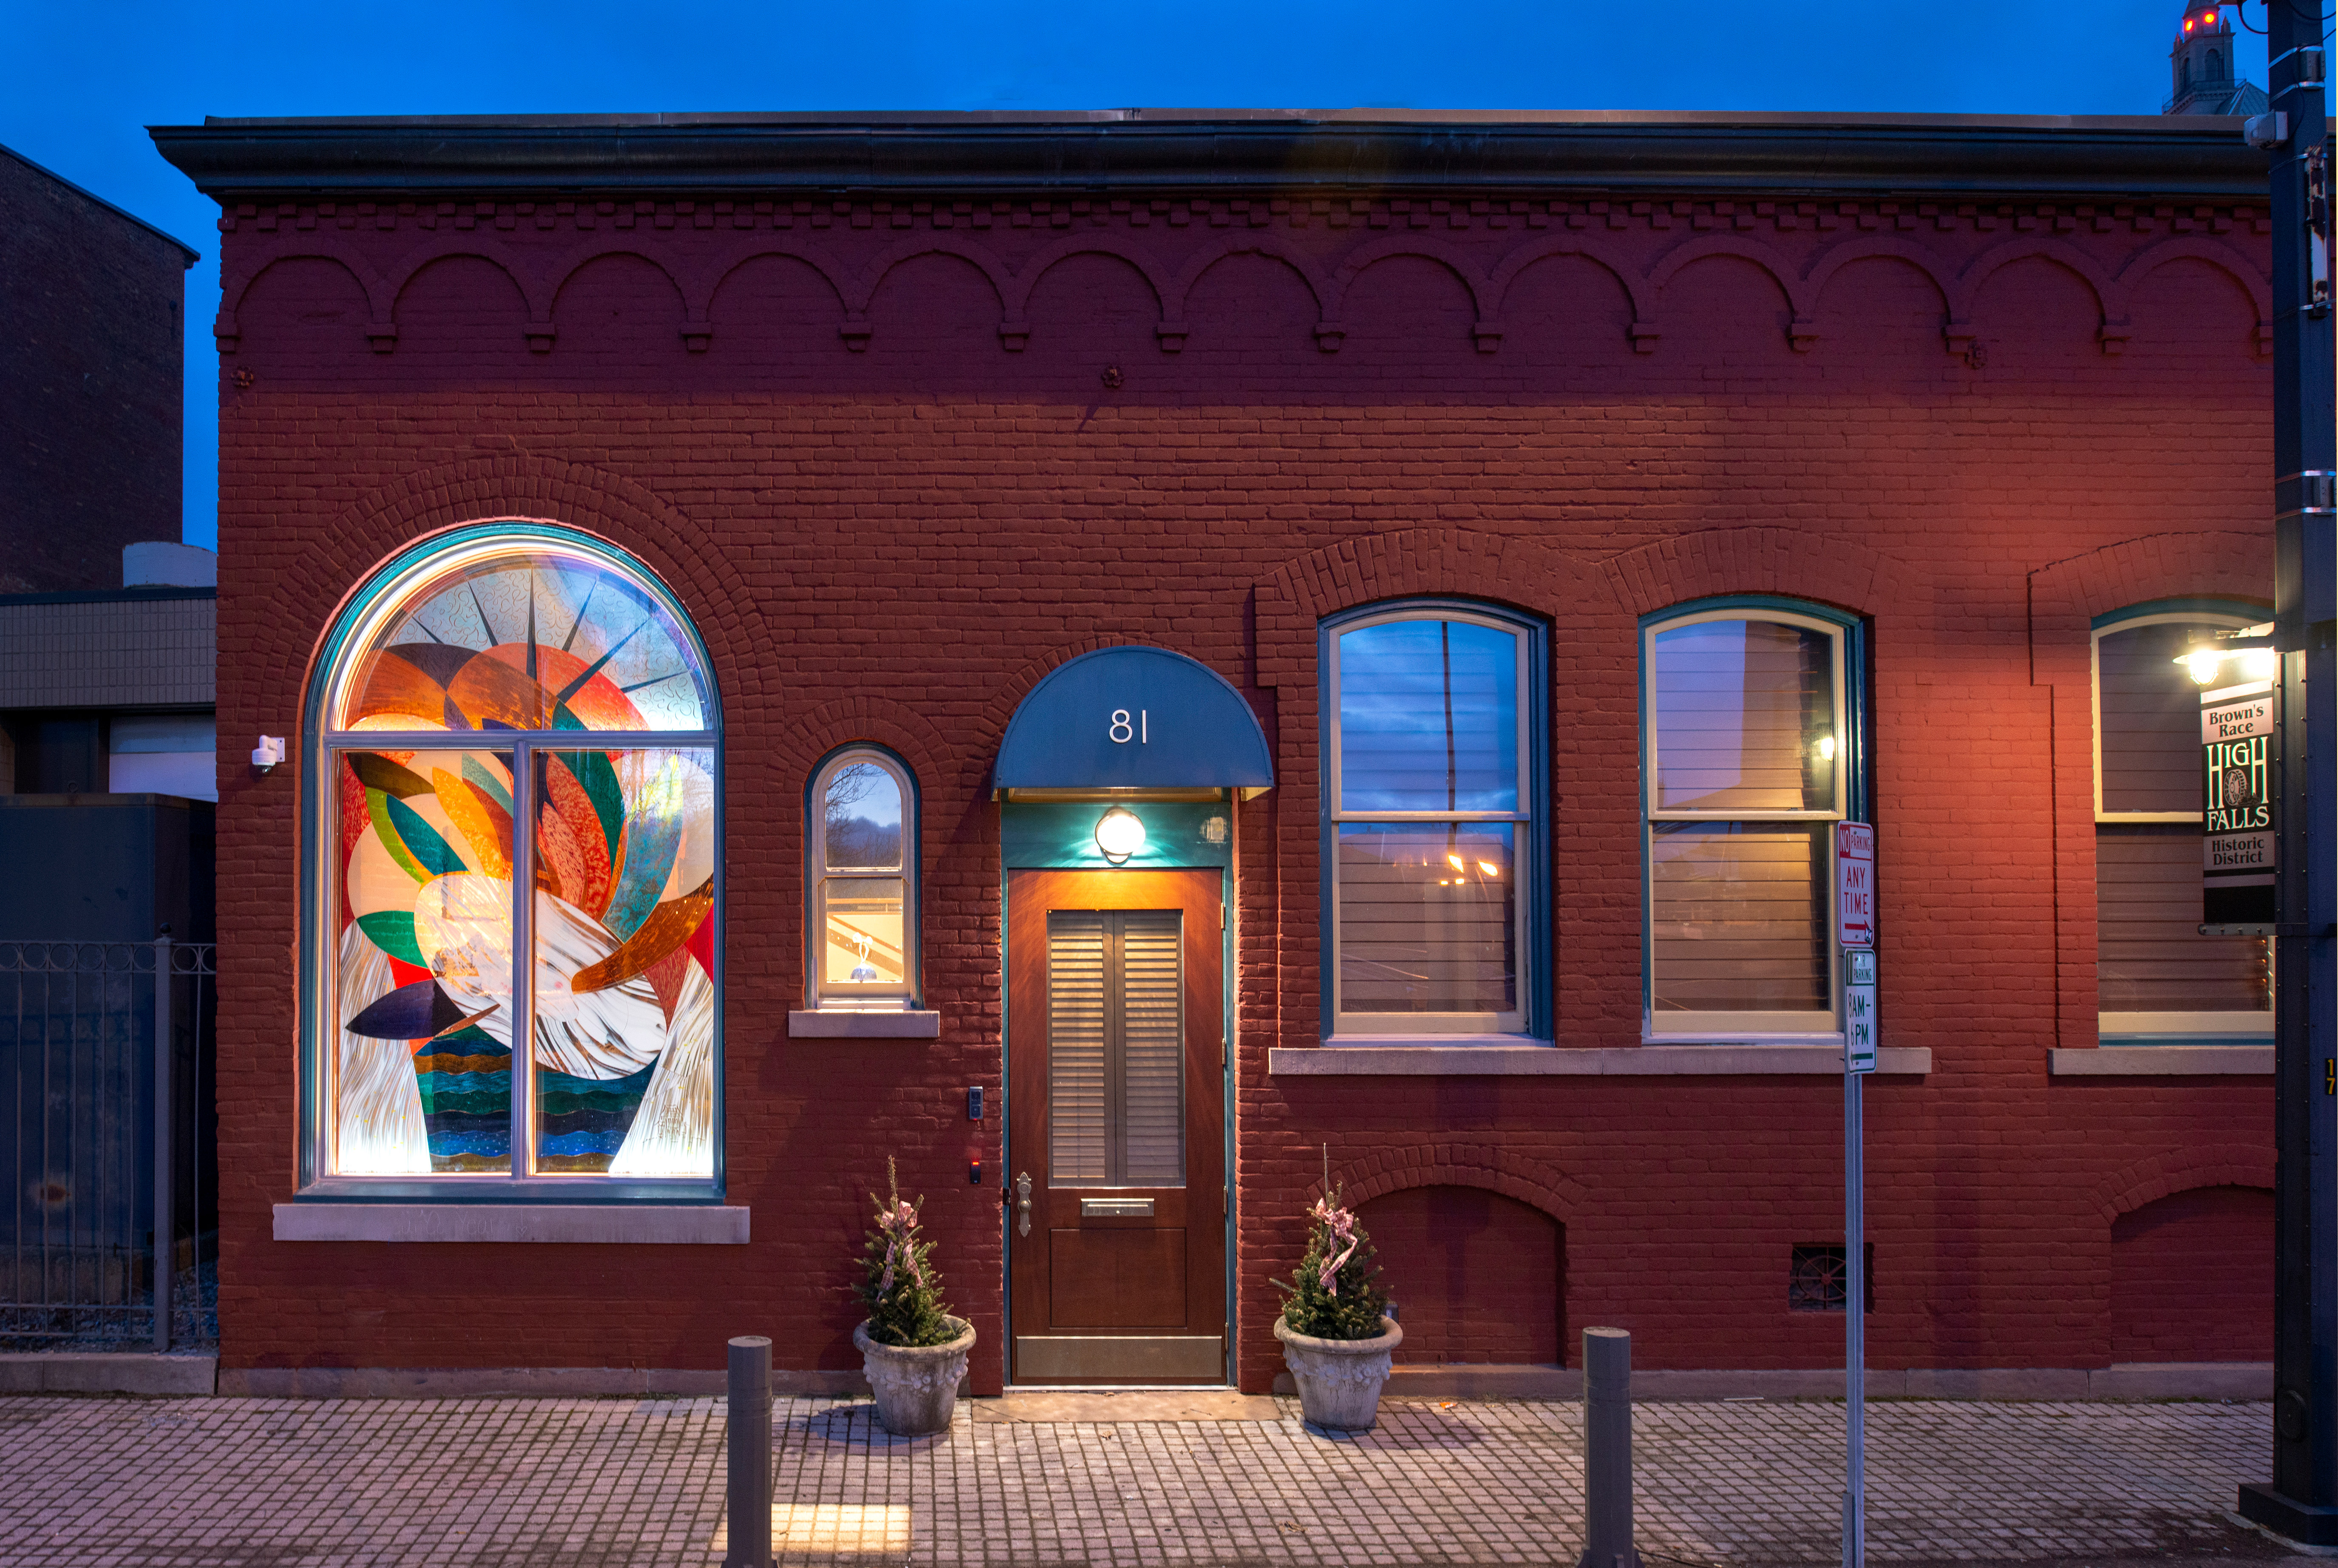 A 10.5-foot-tall abstract glass artwork defines the street-facing facade of a private residence in Rochester’s High Falls historic district. Designed by Nancy Gong, the art glass window features Bendheim’s mouth-blown Lamberts® glass and an innovative lead-free lamination technique. Photo by John Griebsch, courtesy of Nancy Gong Glass Works. 